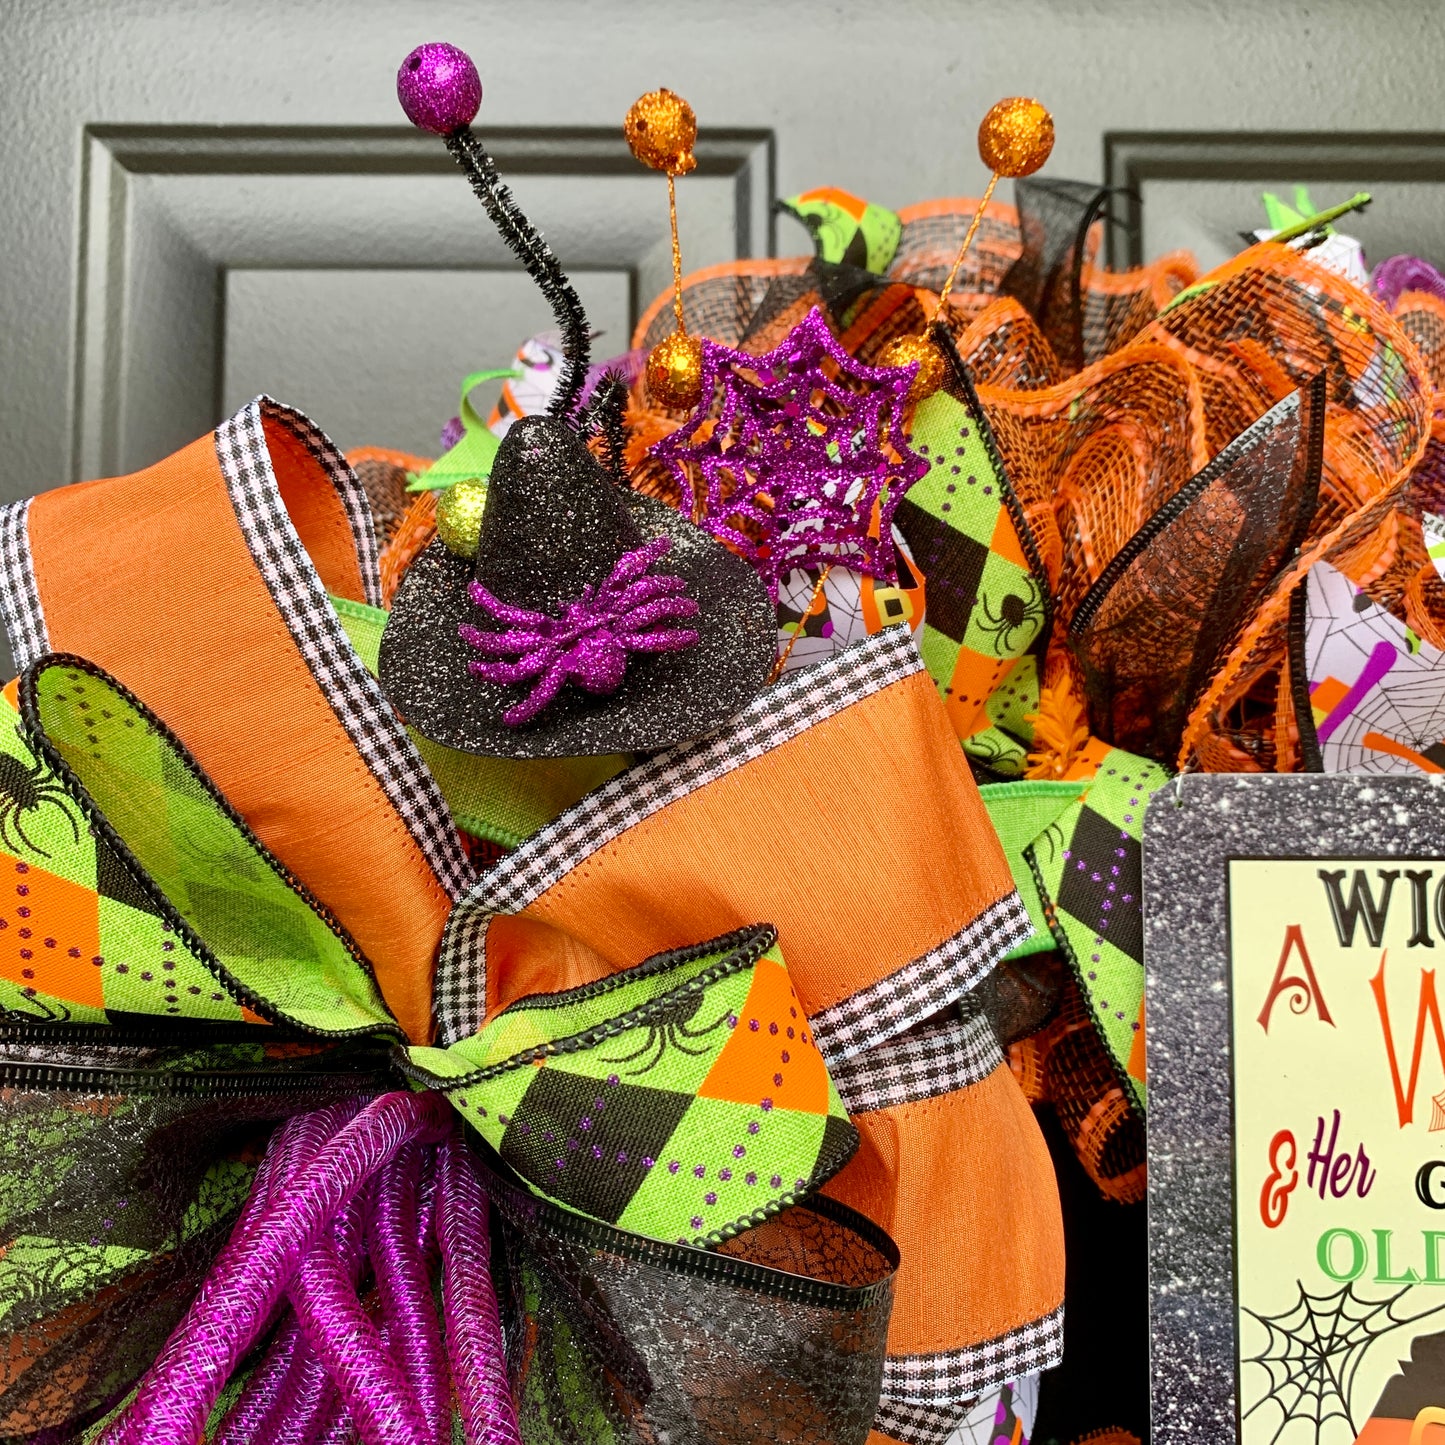 Wicked Witch Wreath, Halloween Witch Wreath, Halloween Witch Door Hanger, Witch Hat Wreath, Halloween Wreath, Halloween Welcome Wreath